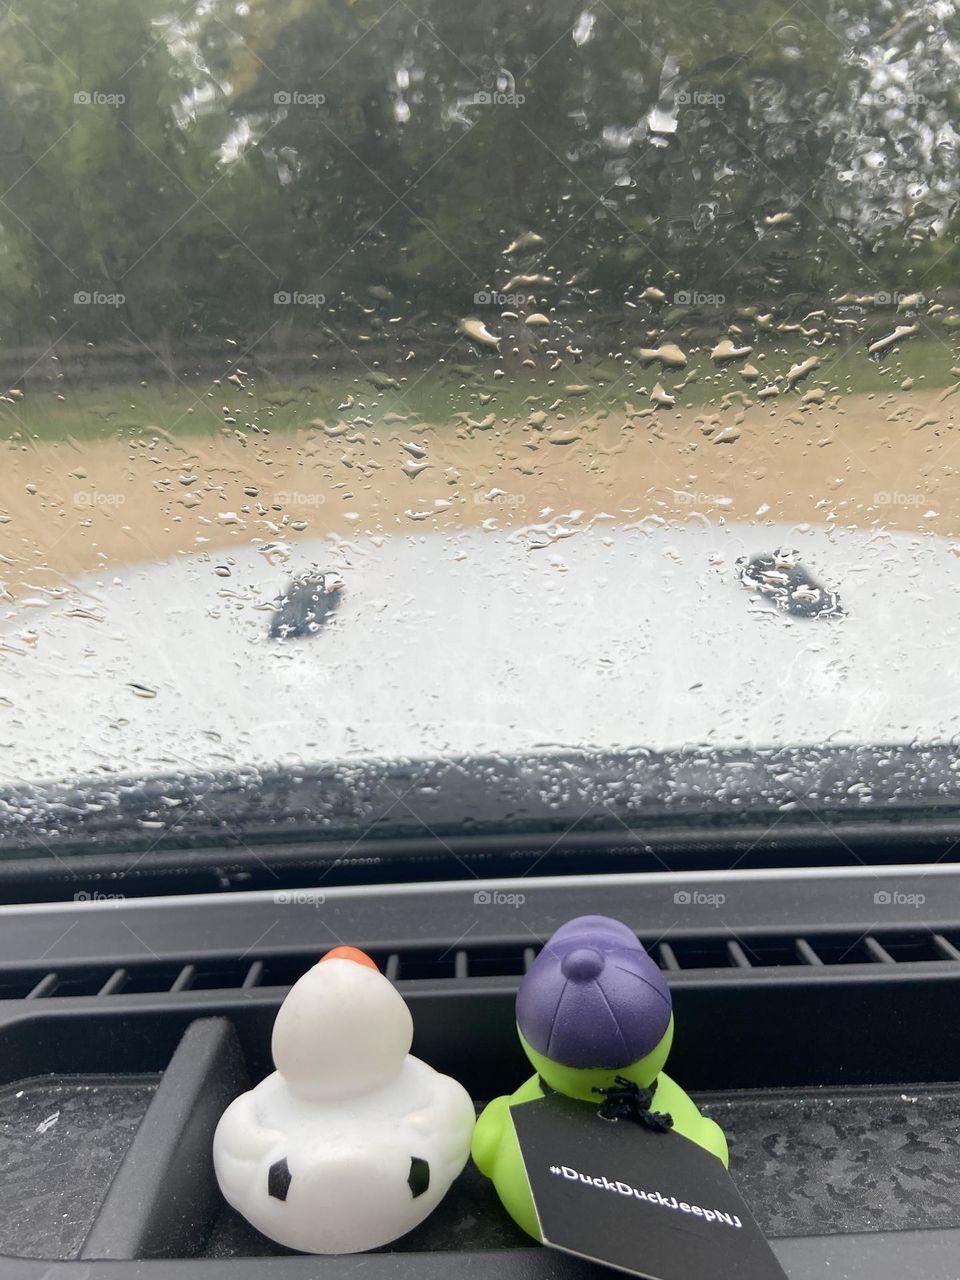 Two rubber ducks sit in “the duck pond” (the flat area of the dash) and “view” the rain. Both were gifted to me anonymously by strangers who left them on my Jeep as a way to say “I like your Jeep.” Both times, this small gesture made my day!!! 